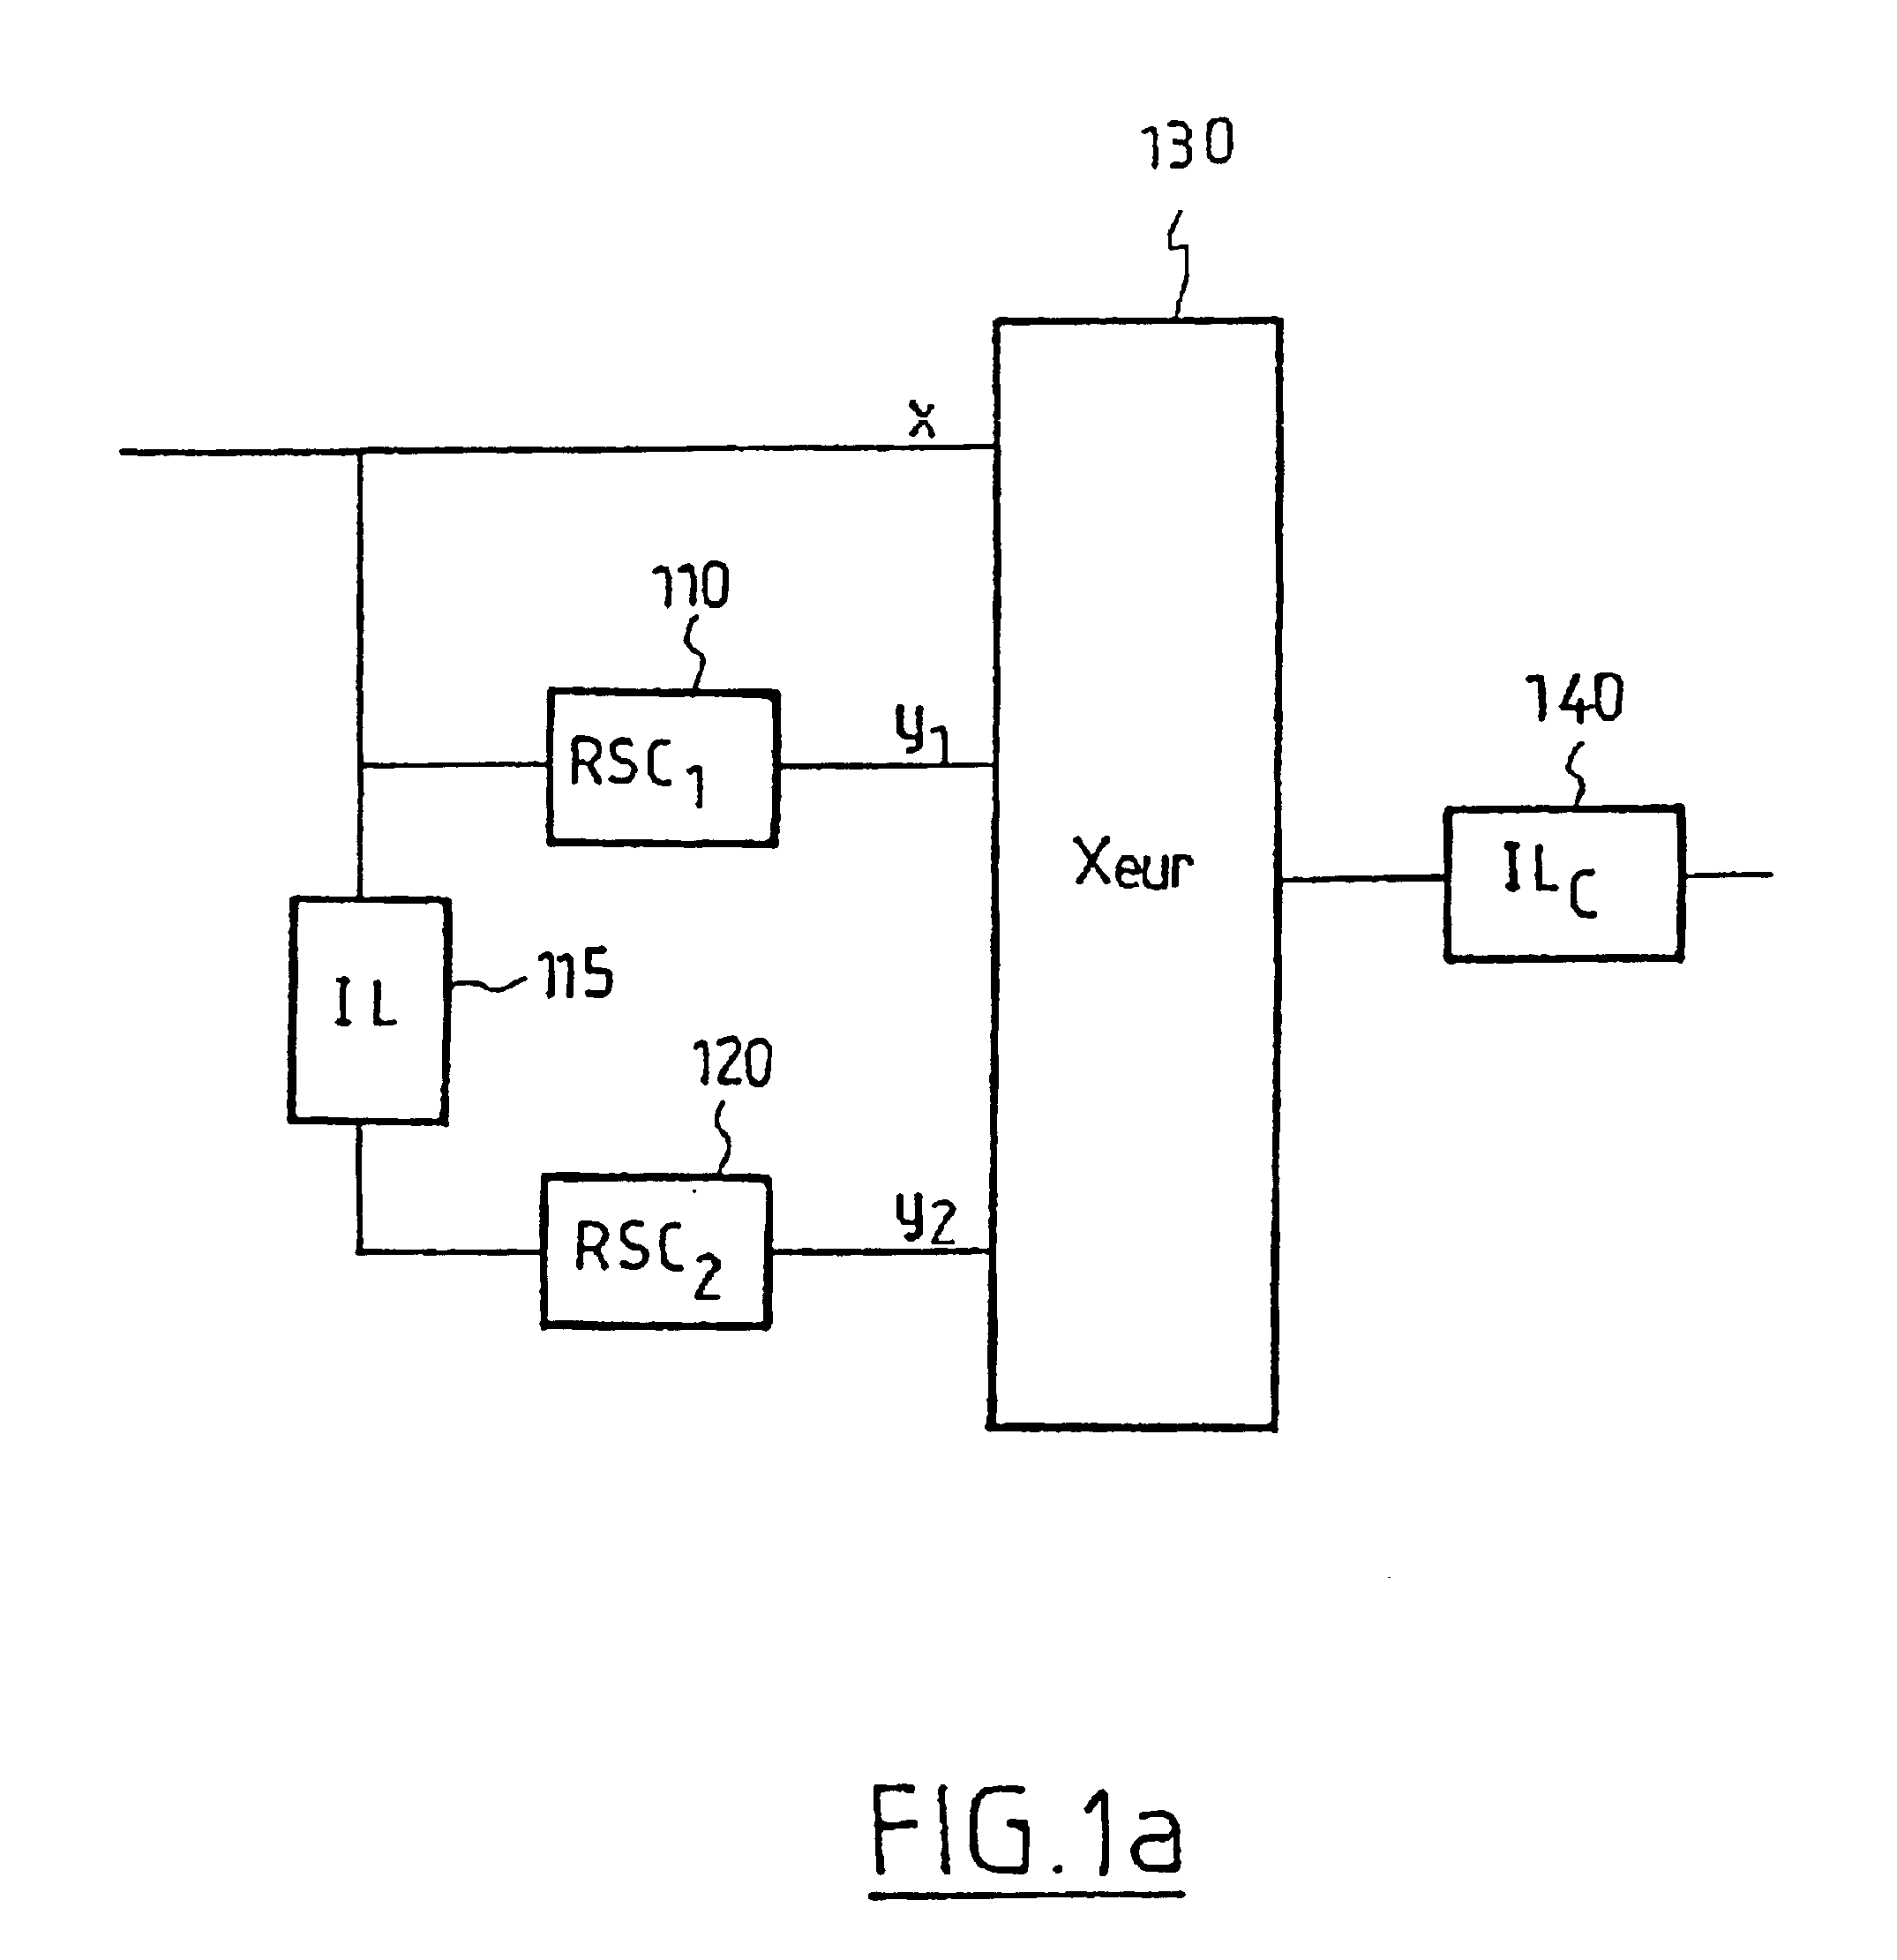 Method for the optimization, under resource constraint, of the size of blocks of coded data